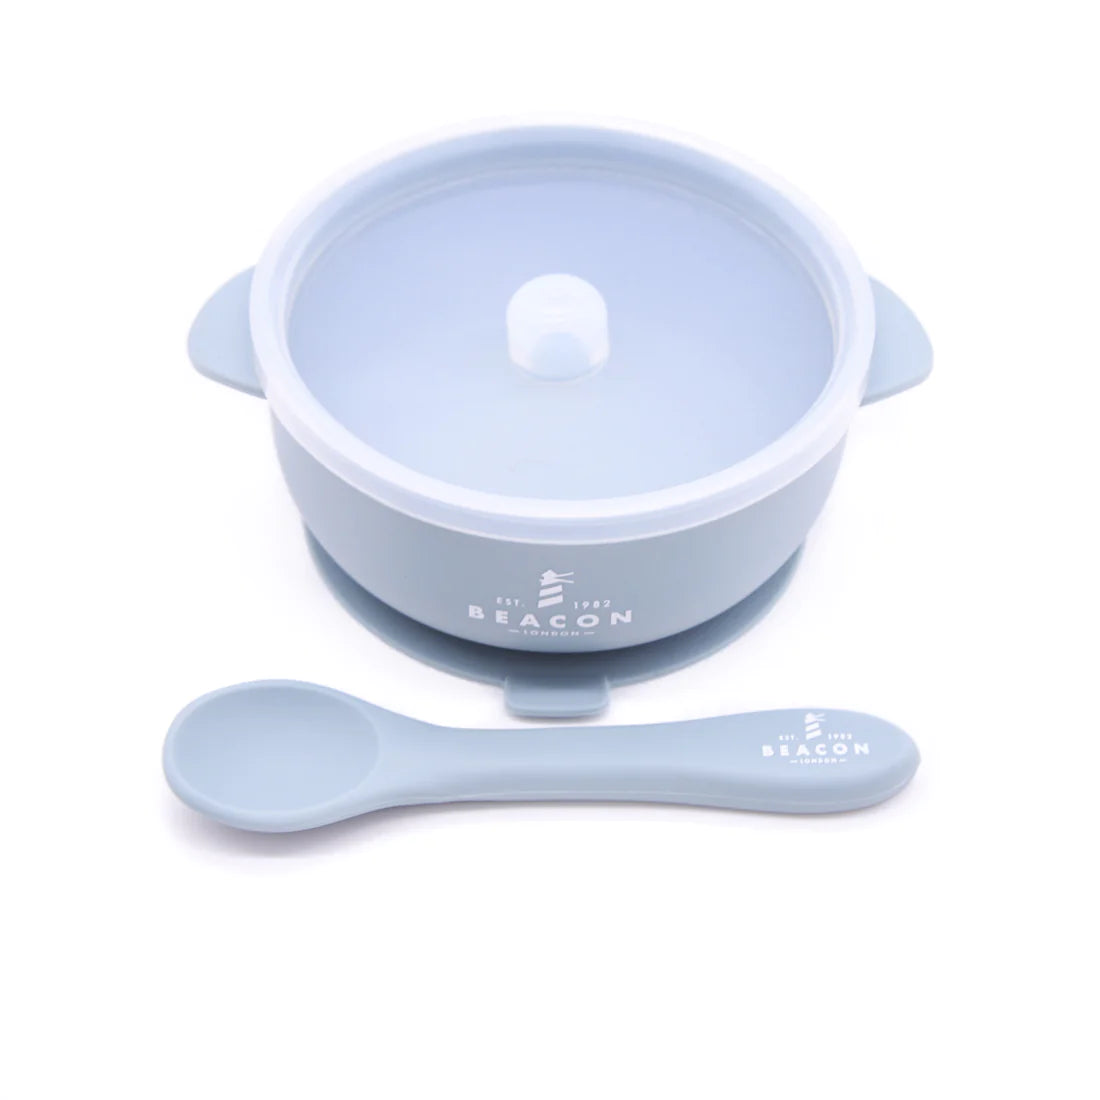 Silicone Suction Bowl & Spoon-Bowls-Second Snuggle Preloved